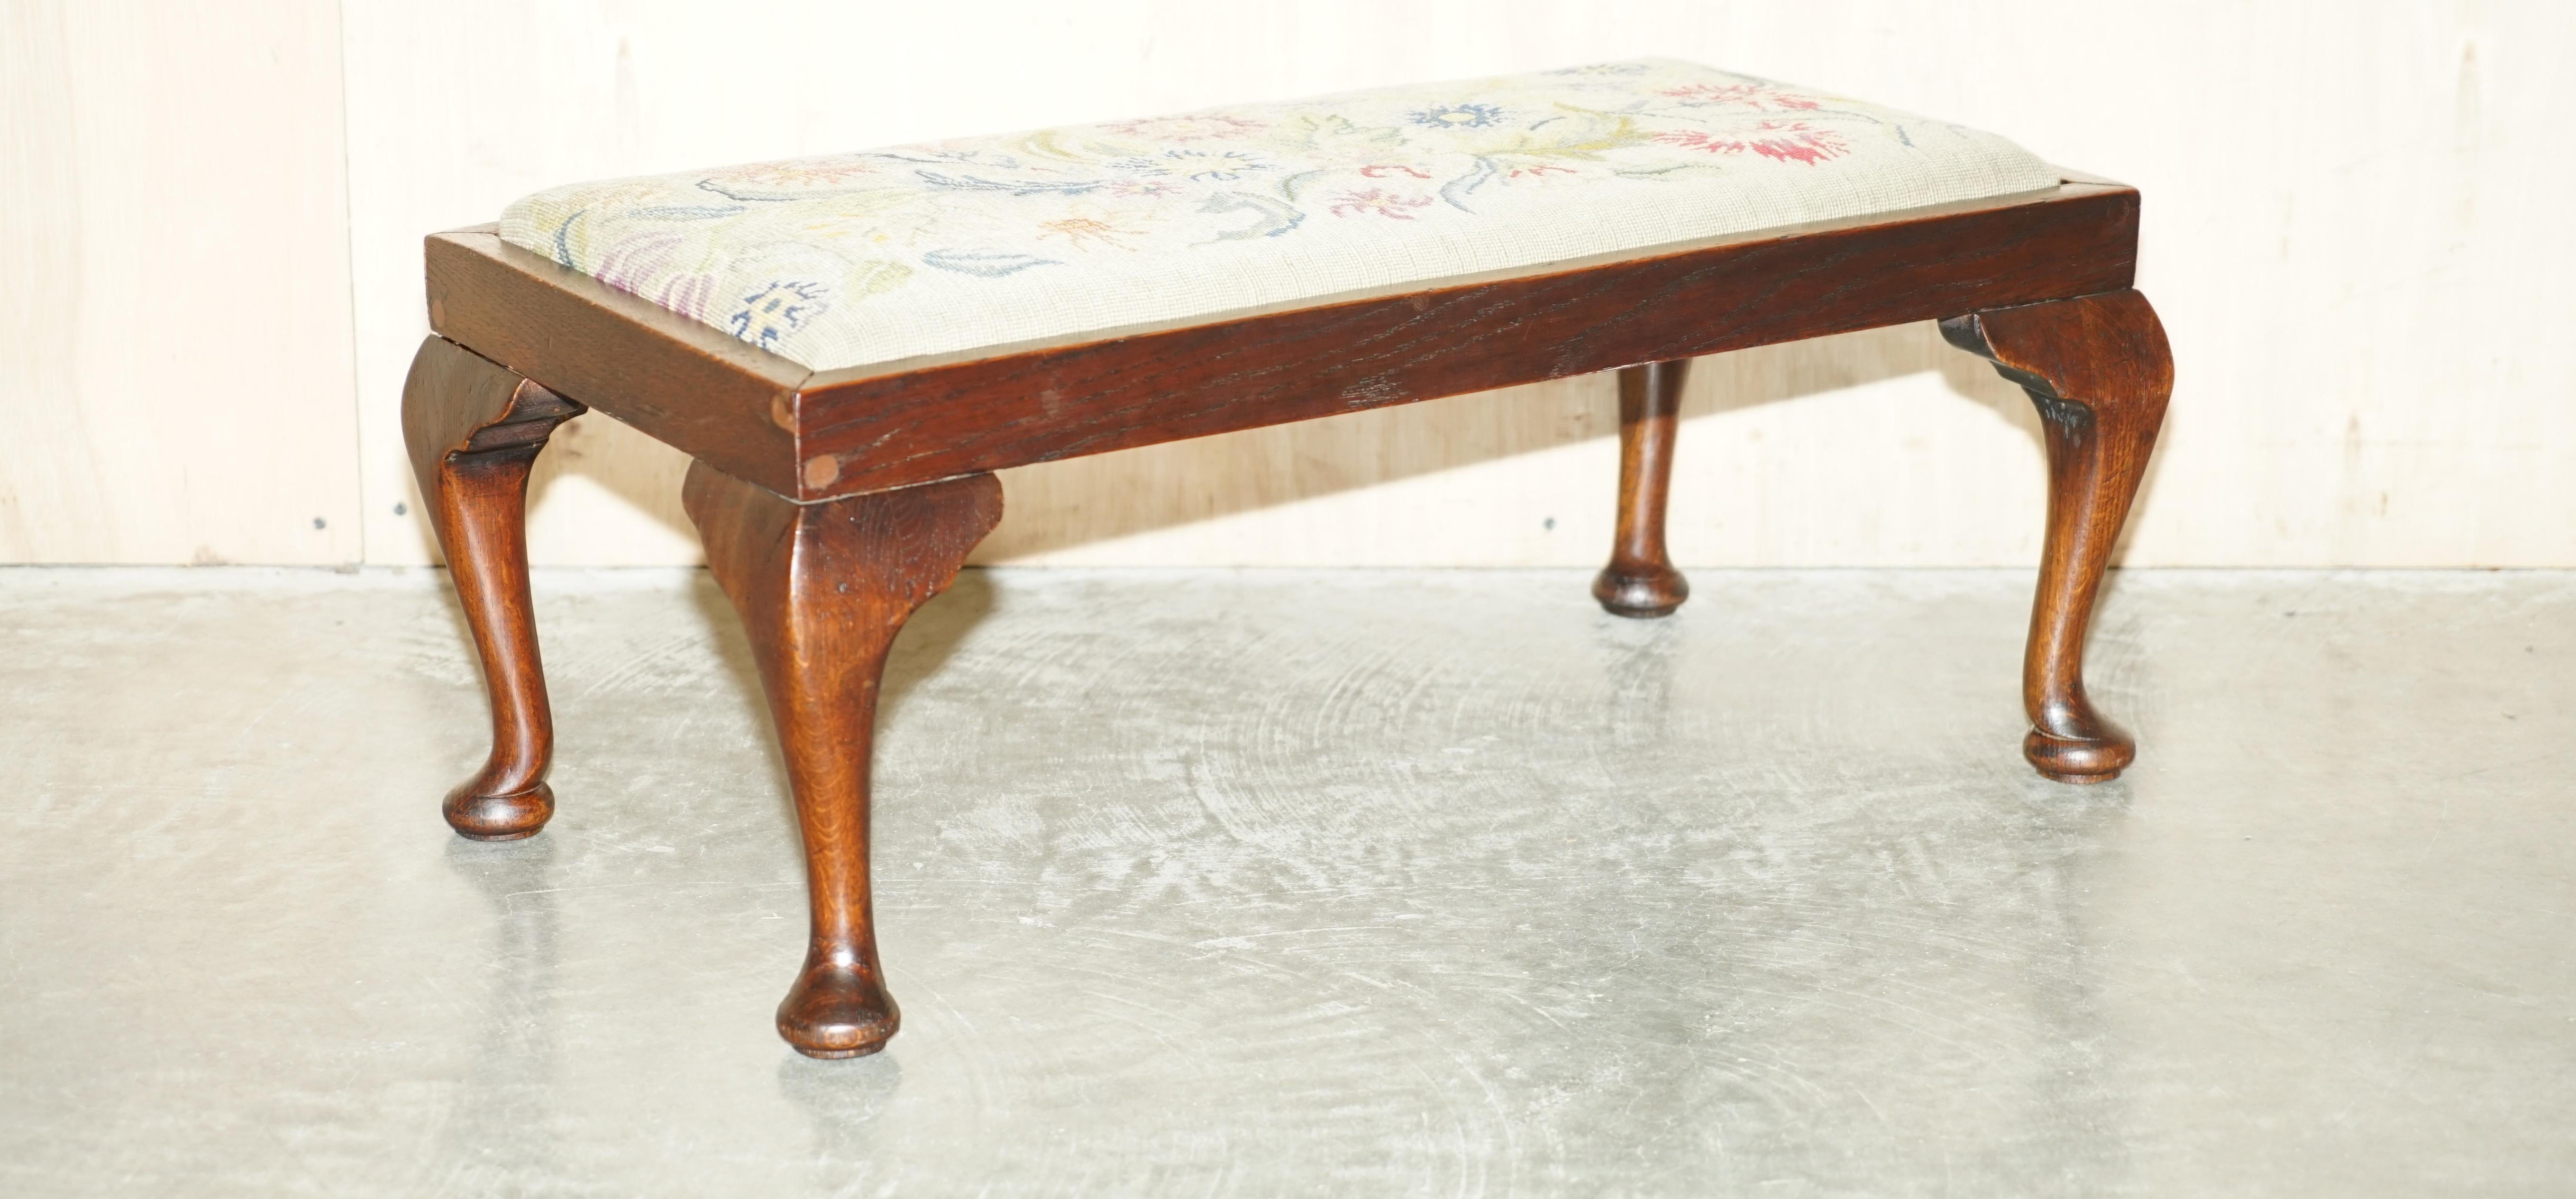 We are delighted to offer for sale this lovely original Edwardian circa 1900-1910 hand carved Walnut Cabriolet legged footstool with floral embroidered upholstery 

A very decorative and well made piece, the top has a period Victorian embroidery